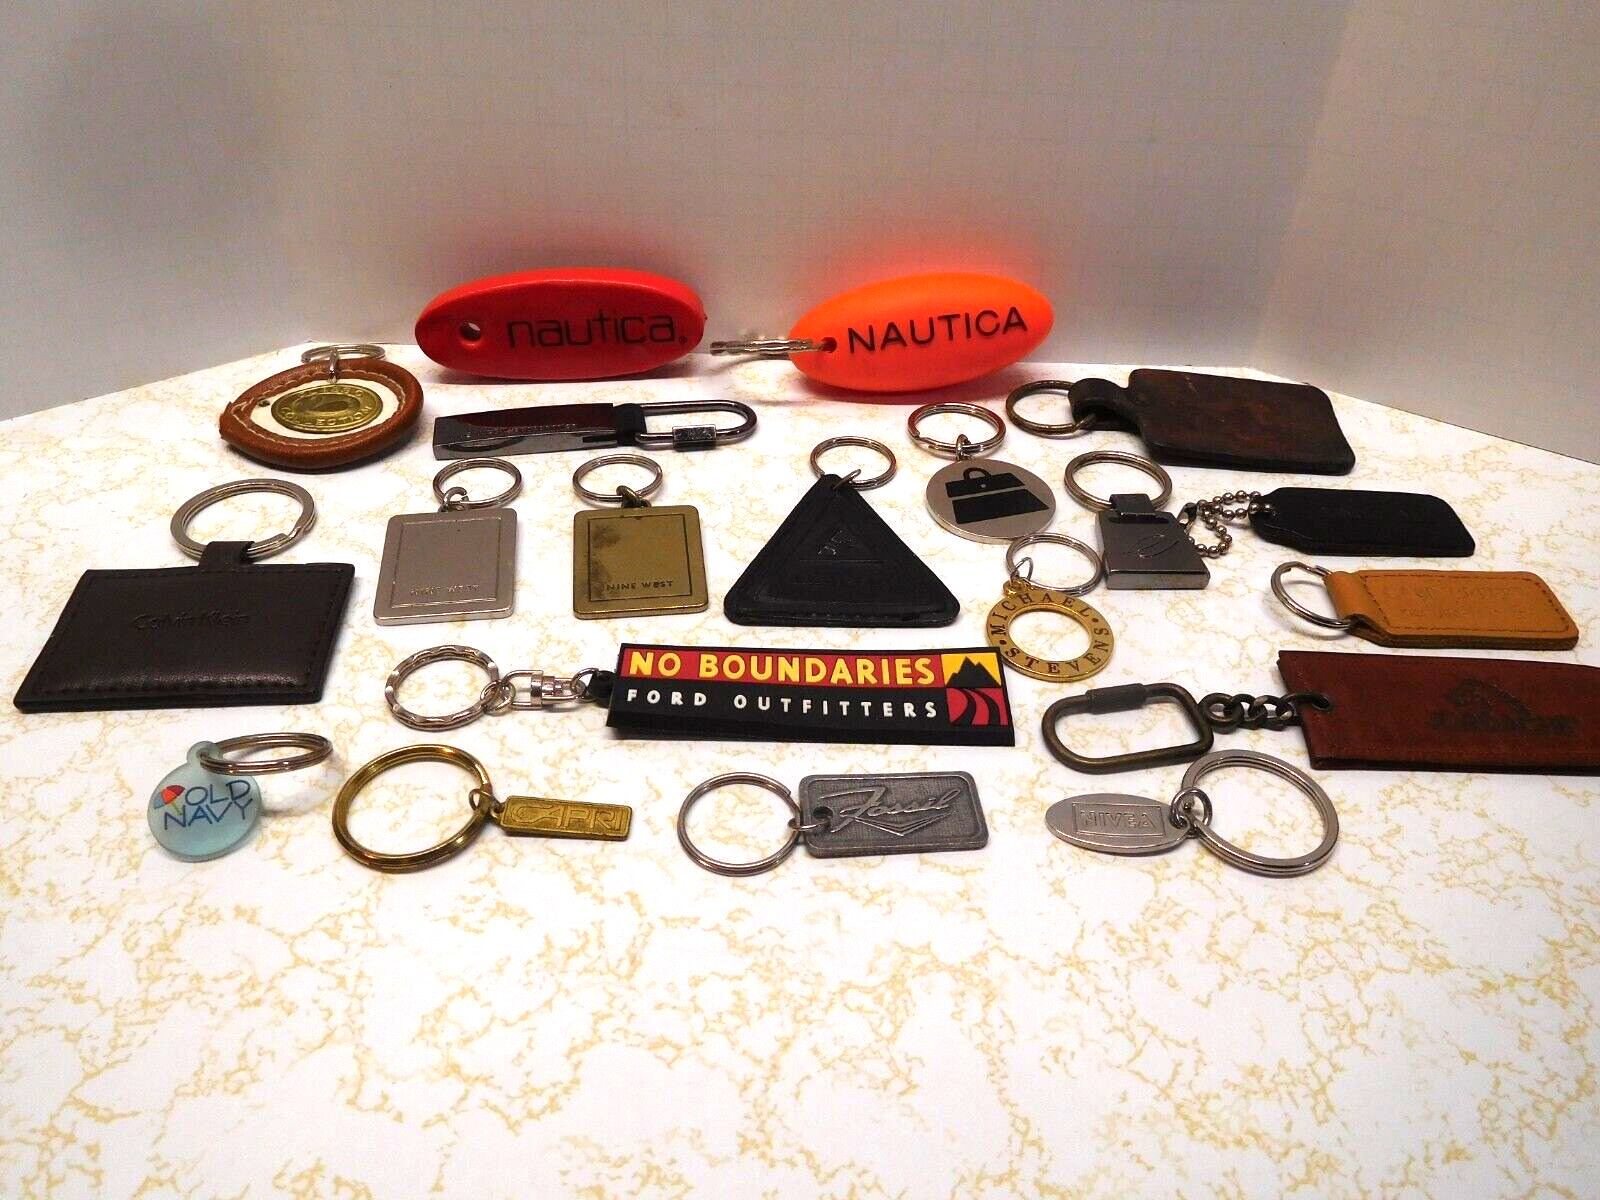 20 Vintage Clothes/Clothing Brands Advertising Keychains ~ Nautica, Nine West